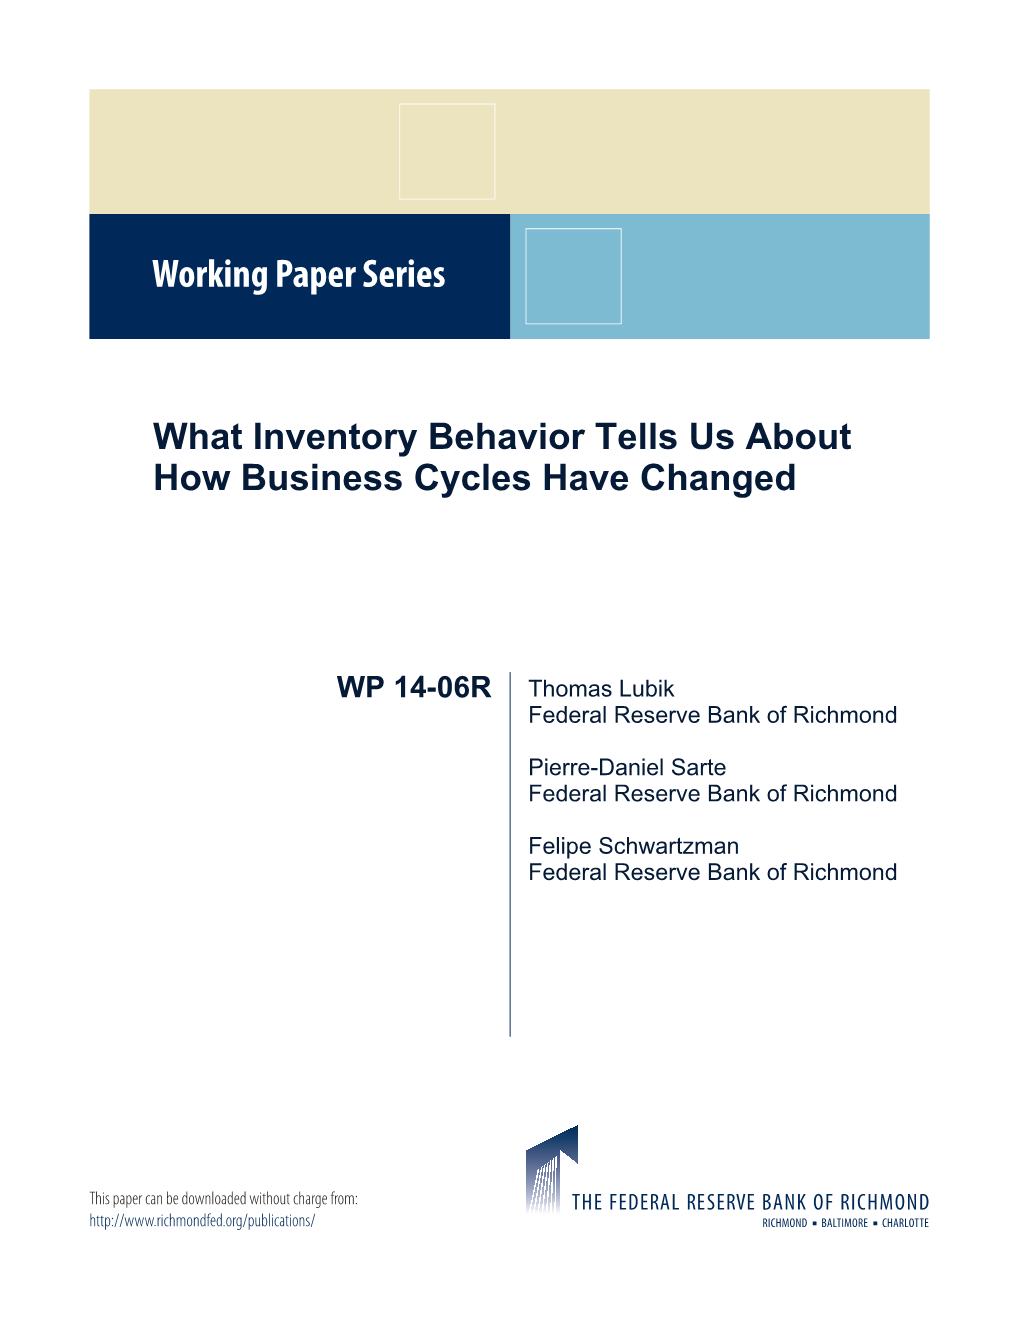 What Inventory Behavior Tells Us About How Business Cycles Have